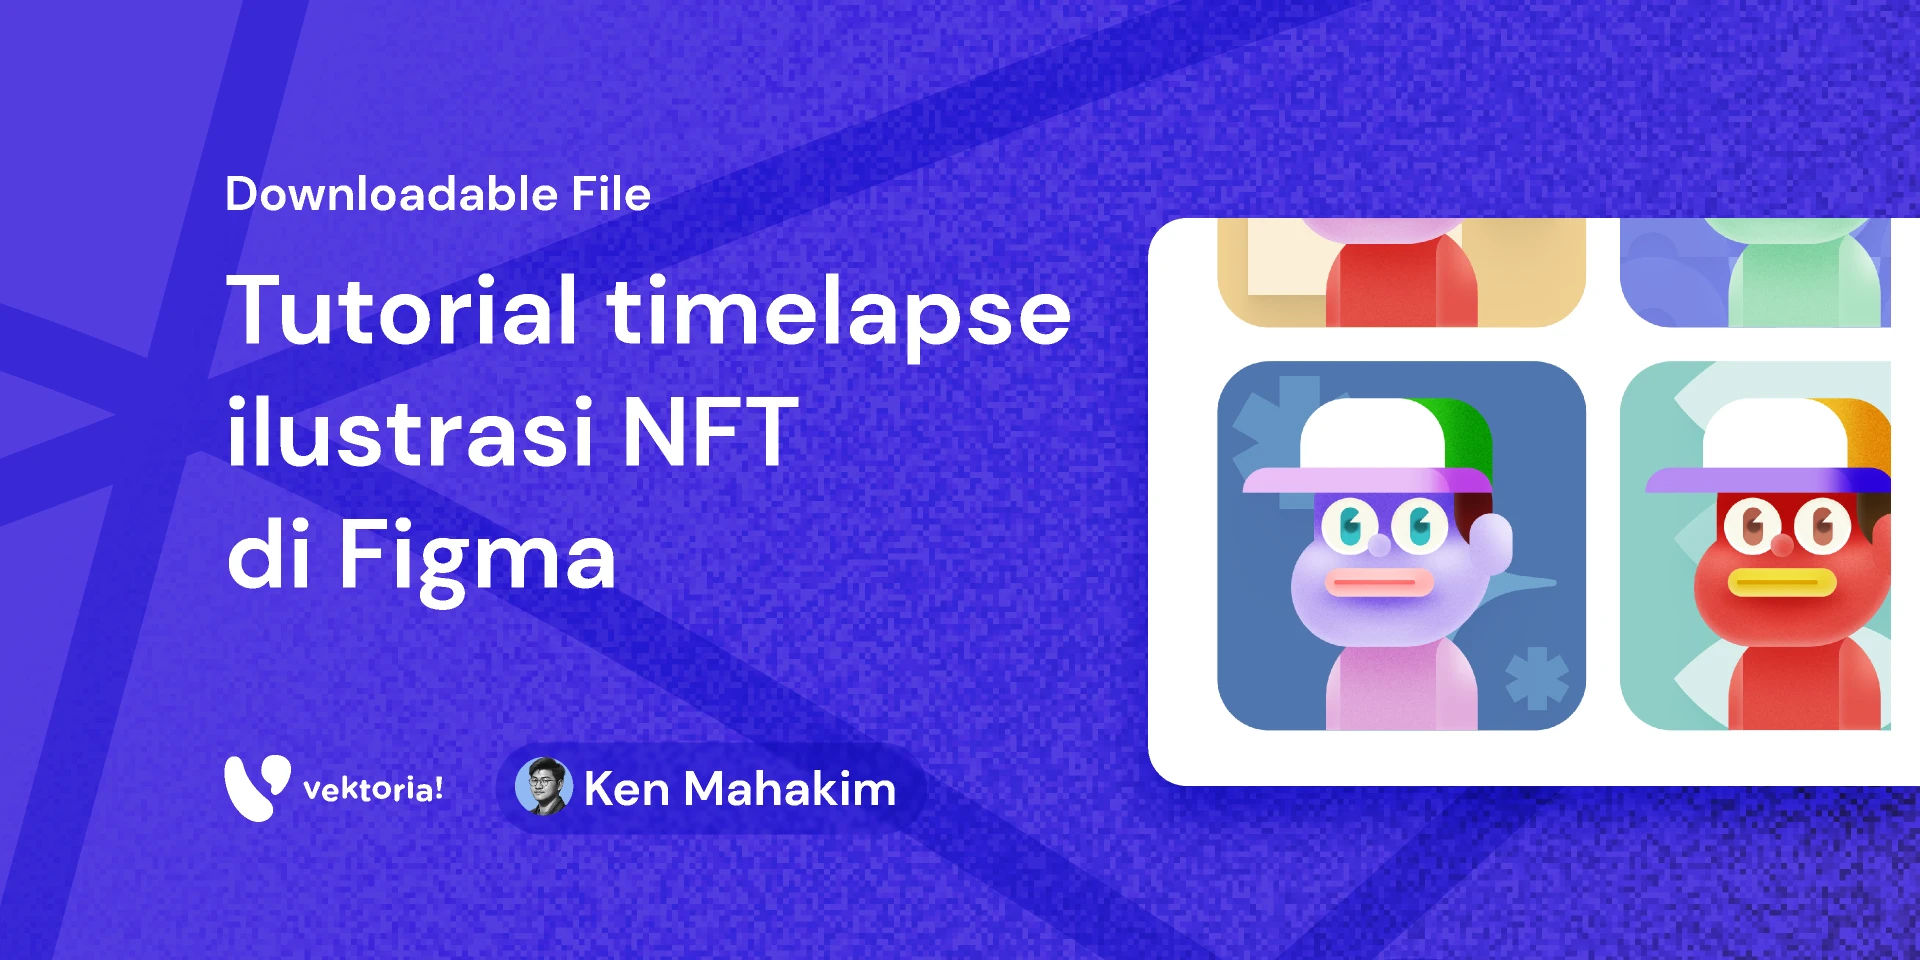 Generating NFT illustration with Figma for Figma and Adobe XD